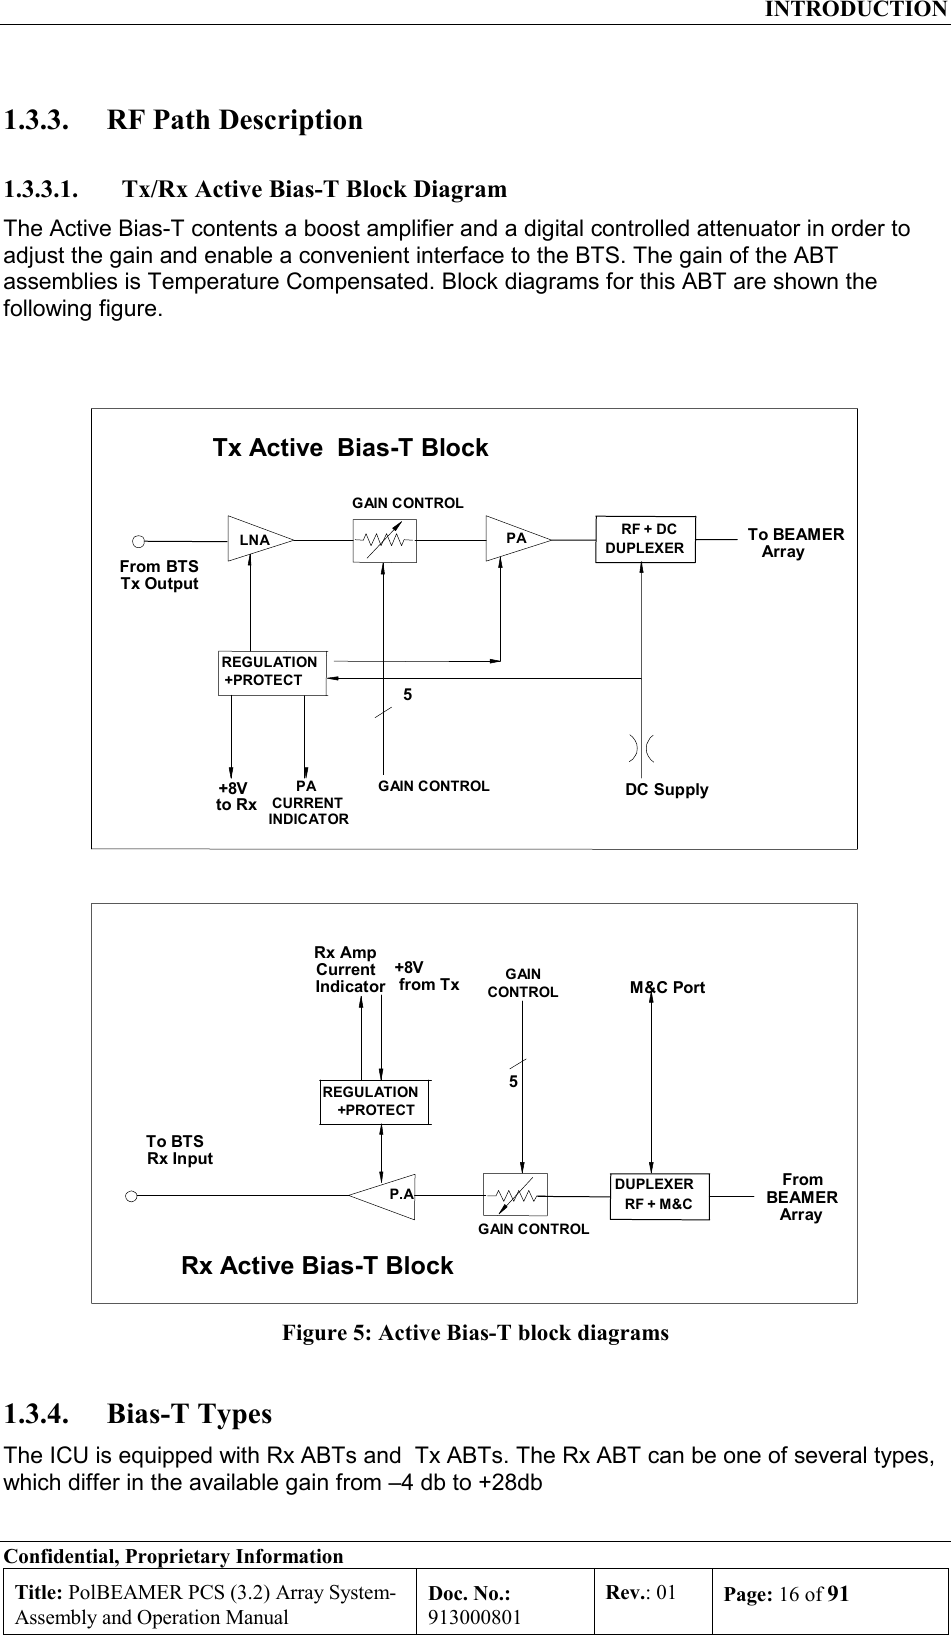  INTRODUCTION Confidential, Proprietary Information Title: PolBEAMER PCS (3.2) Array System- Assembly and Operation Manual Doc. No.: 913000801 Rev.: 01  Page: 16 of 91  1.3.3.  RF Path Description 1.3.3.1.  Tx/Rx Active Bias-T Block Diagram   The Active Bias-T contents a boost amplifier and a digital controlled attenuator in order to adjust the gain and enable a convenient interface to the BTS. The gain of the ABT assemblies is Temperature Compensated. Block diagrams for this ABT are shown the following figure. REGULATION +PROTECT PA LNA GAIN CONTROLDUPLEXER PA CURRENT INDICATORGAIN CONTROL 5 DC SupplyRF + DC +8V to Rx From BTSTx Output  To BEAMER Array Tx Active Bias-T Block Rx Active Bias-T Block P.A GAIN CONTROL From BEAMER ArrayRF + M&amp;CDUPLEXER +8V from Tx Rx Amp CurrentIndicator  GAINCONTROL 5M&amp;C PortREGULATION +PROTECT To BTS Rx Input Figure 5: Active Bias-T block diagrams 1.3.4. Bias-T Types  The ICU is equipped with Rx ABTs and  Tx ABTs. The Rx ABT can be one of several types, which differ in the available gain from –4 db to +28db 